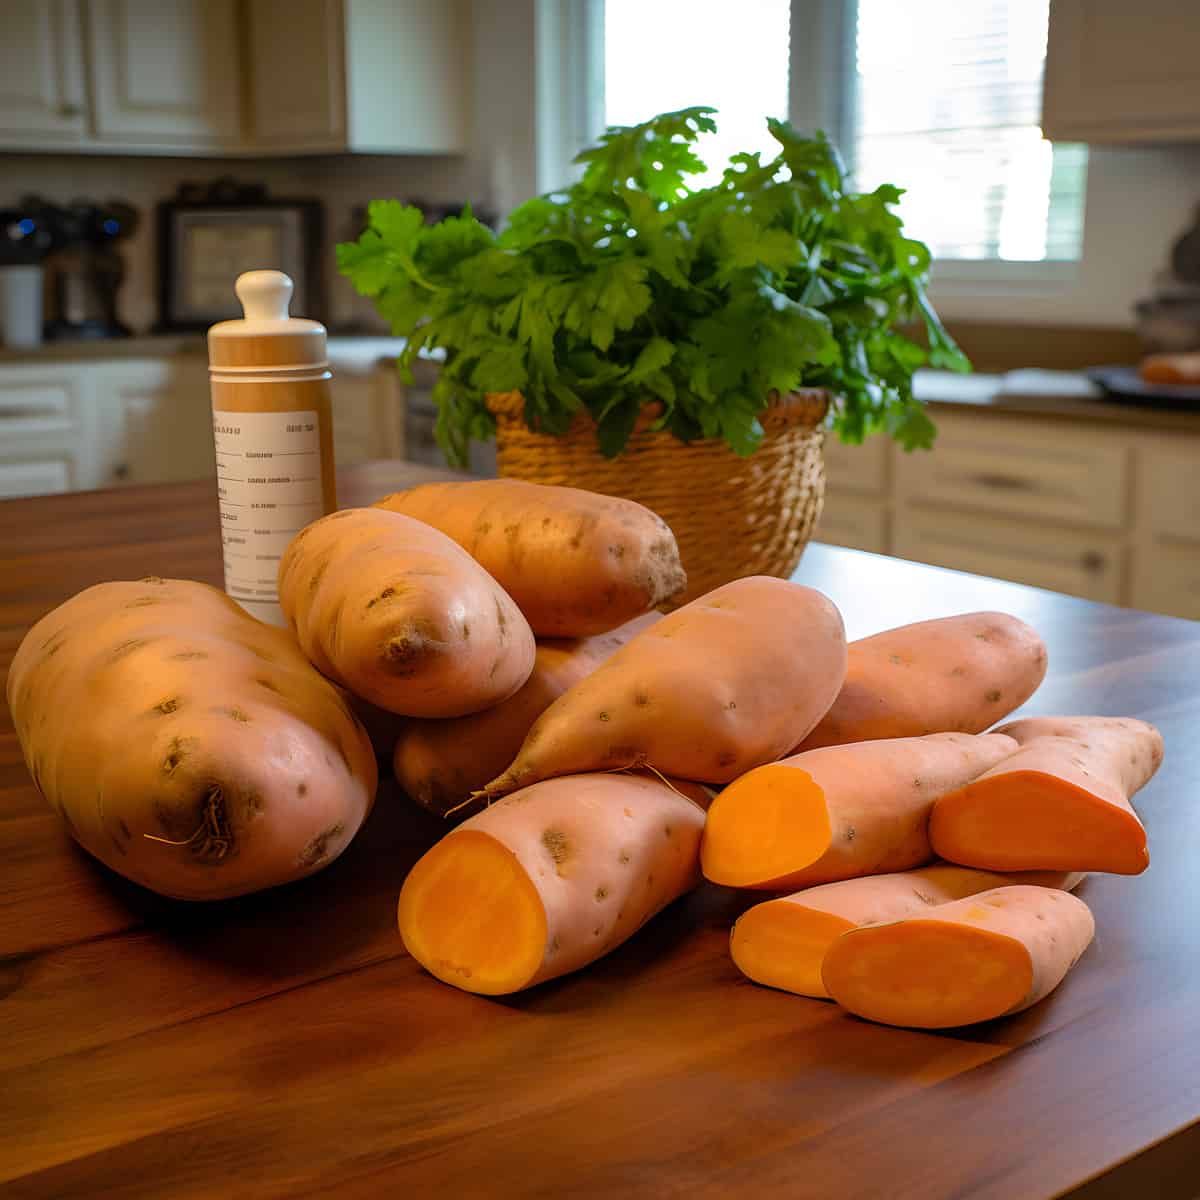 Hopi Or Hm Sweet Potatoes on a kitchen counter